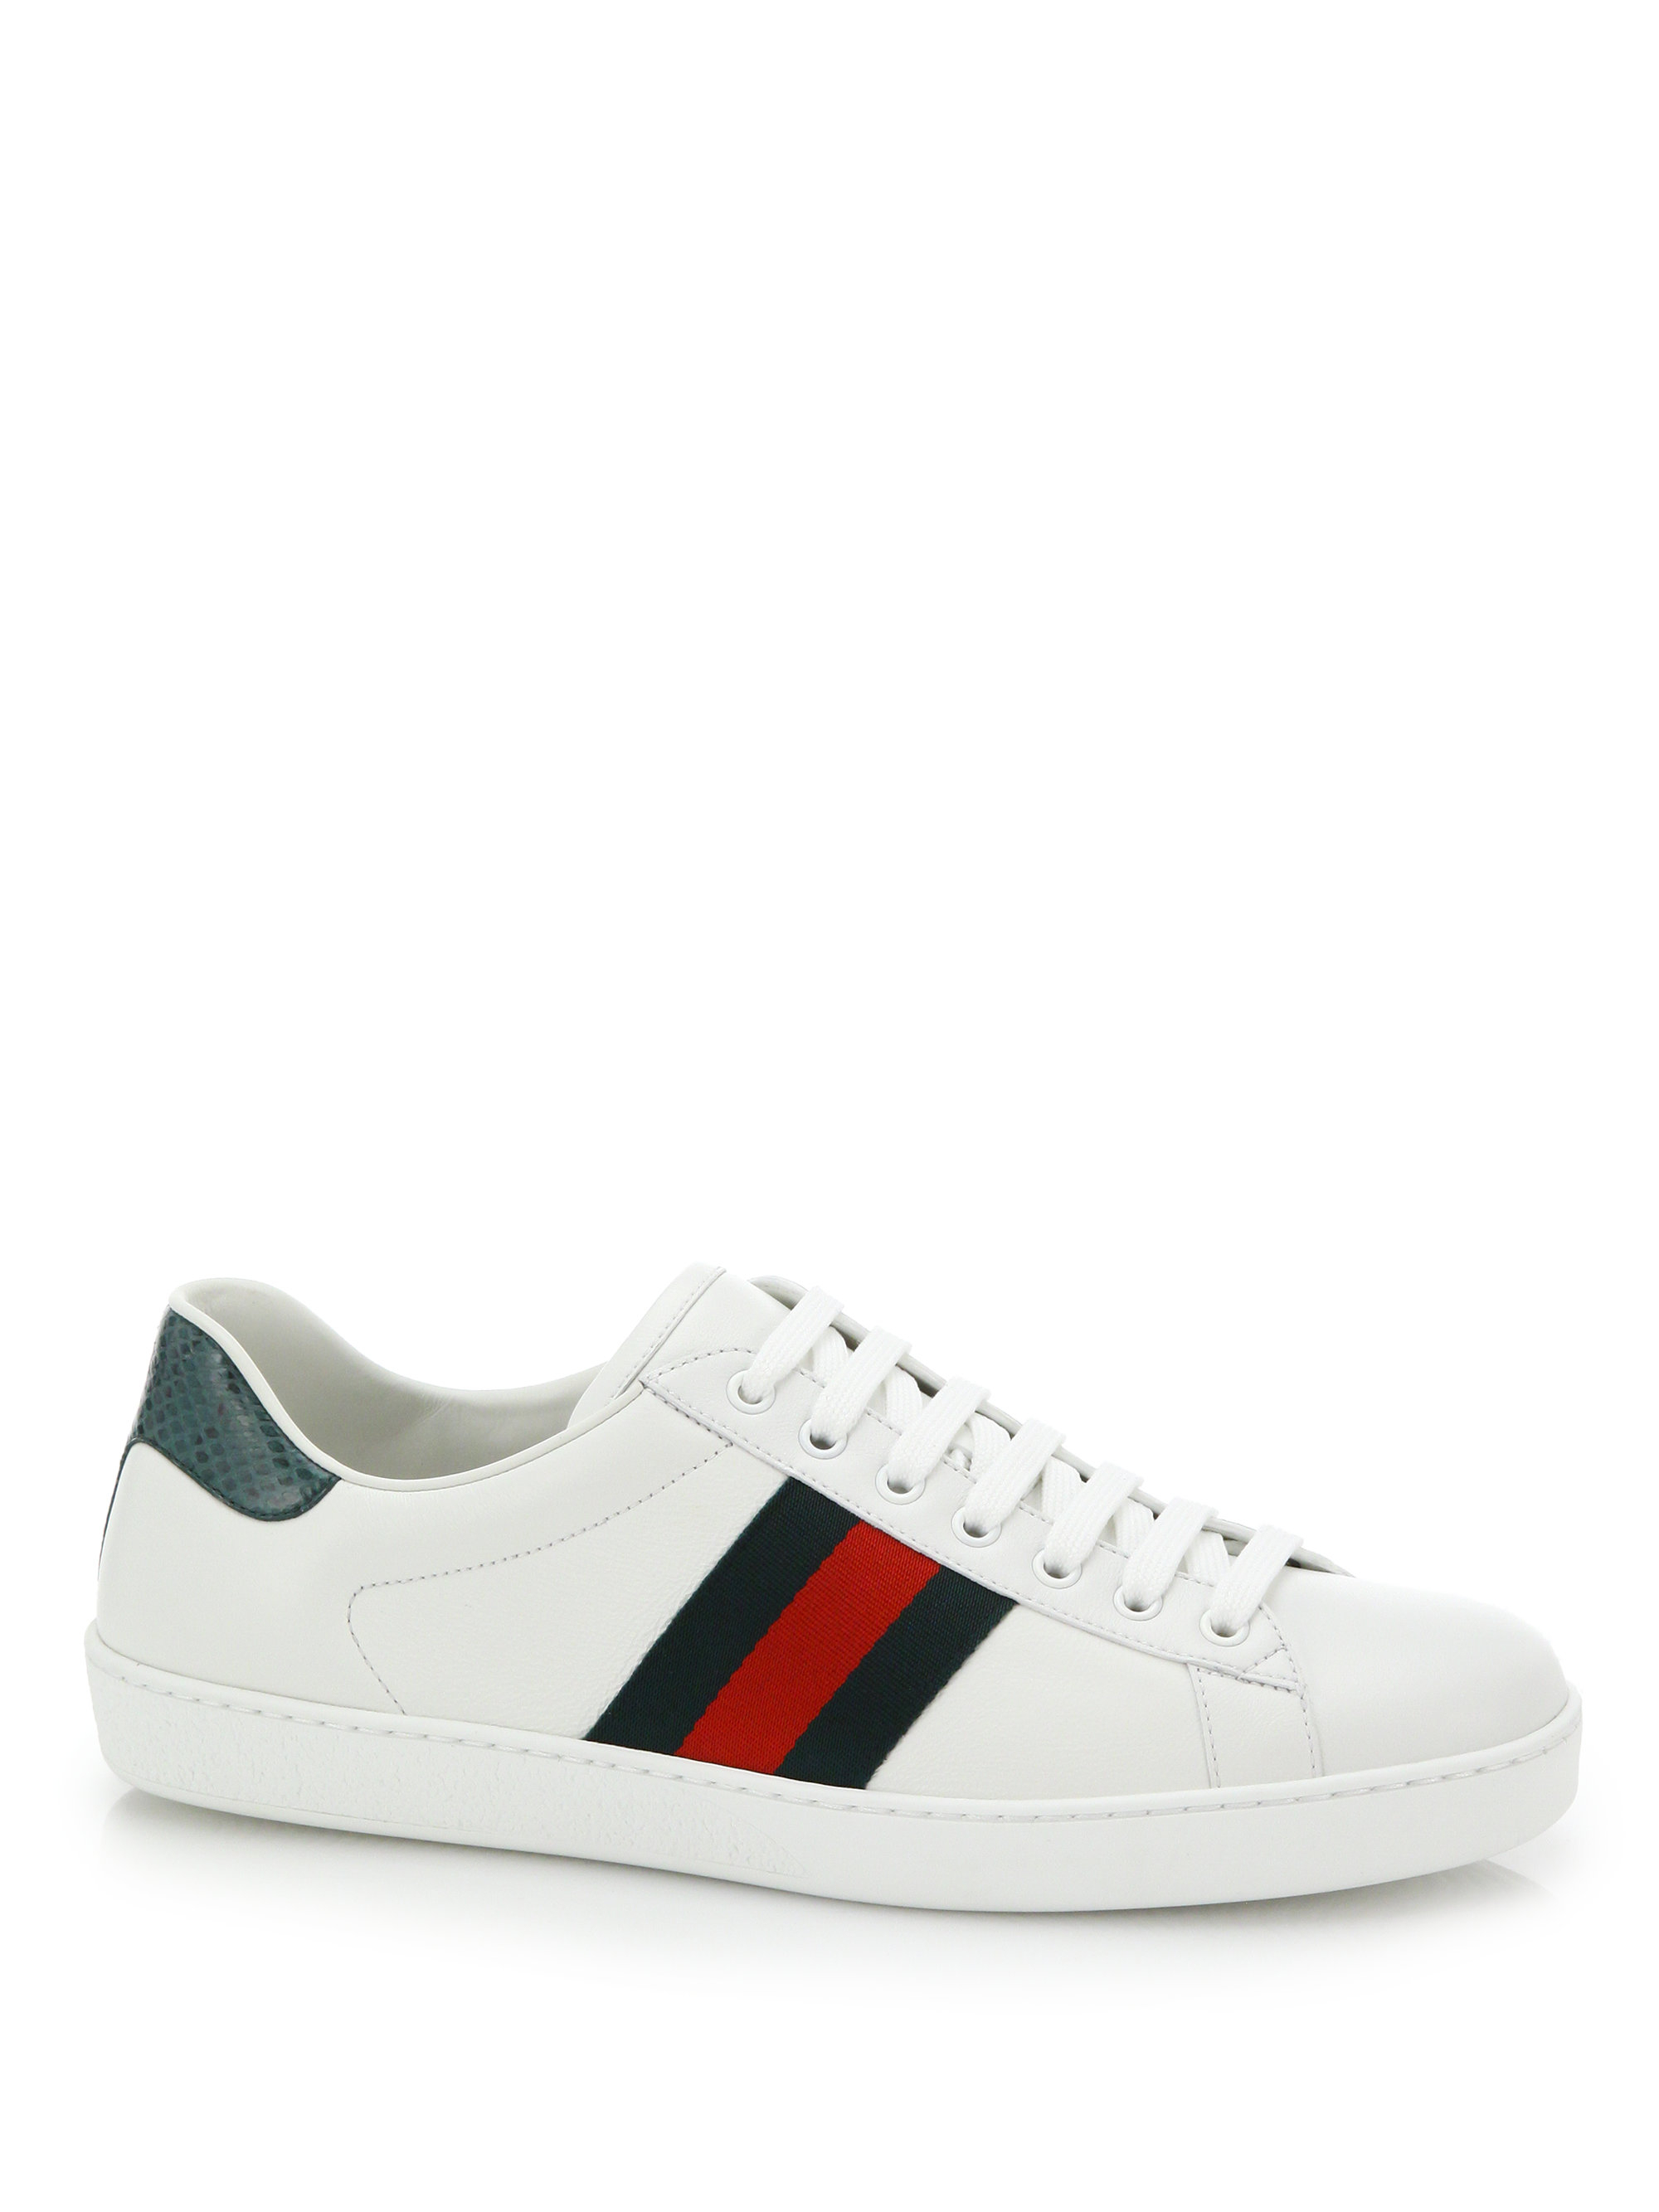 Gucci Sneakers Men On Sale For Men 87